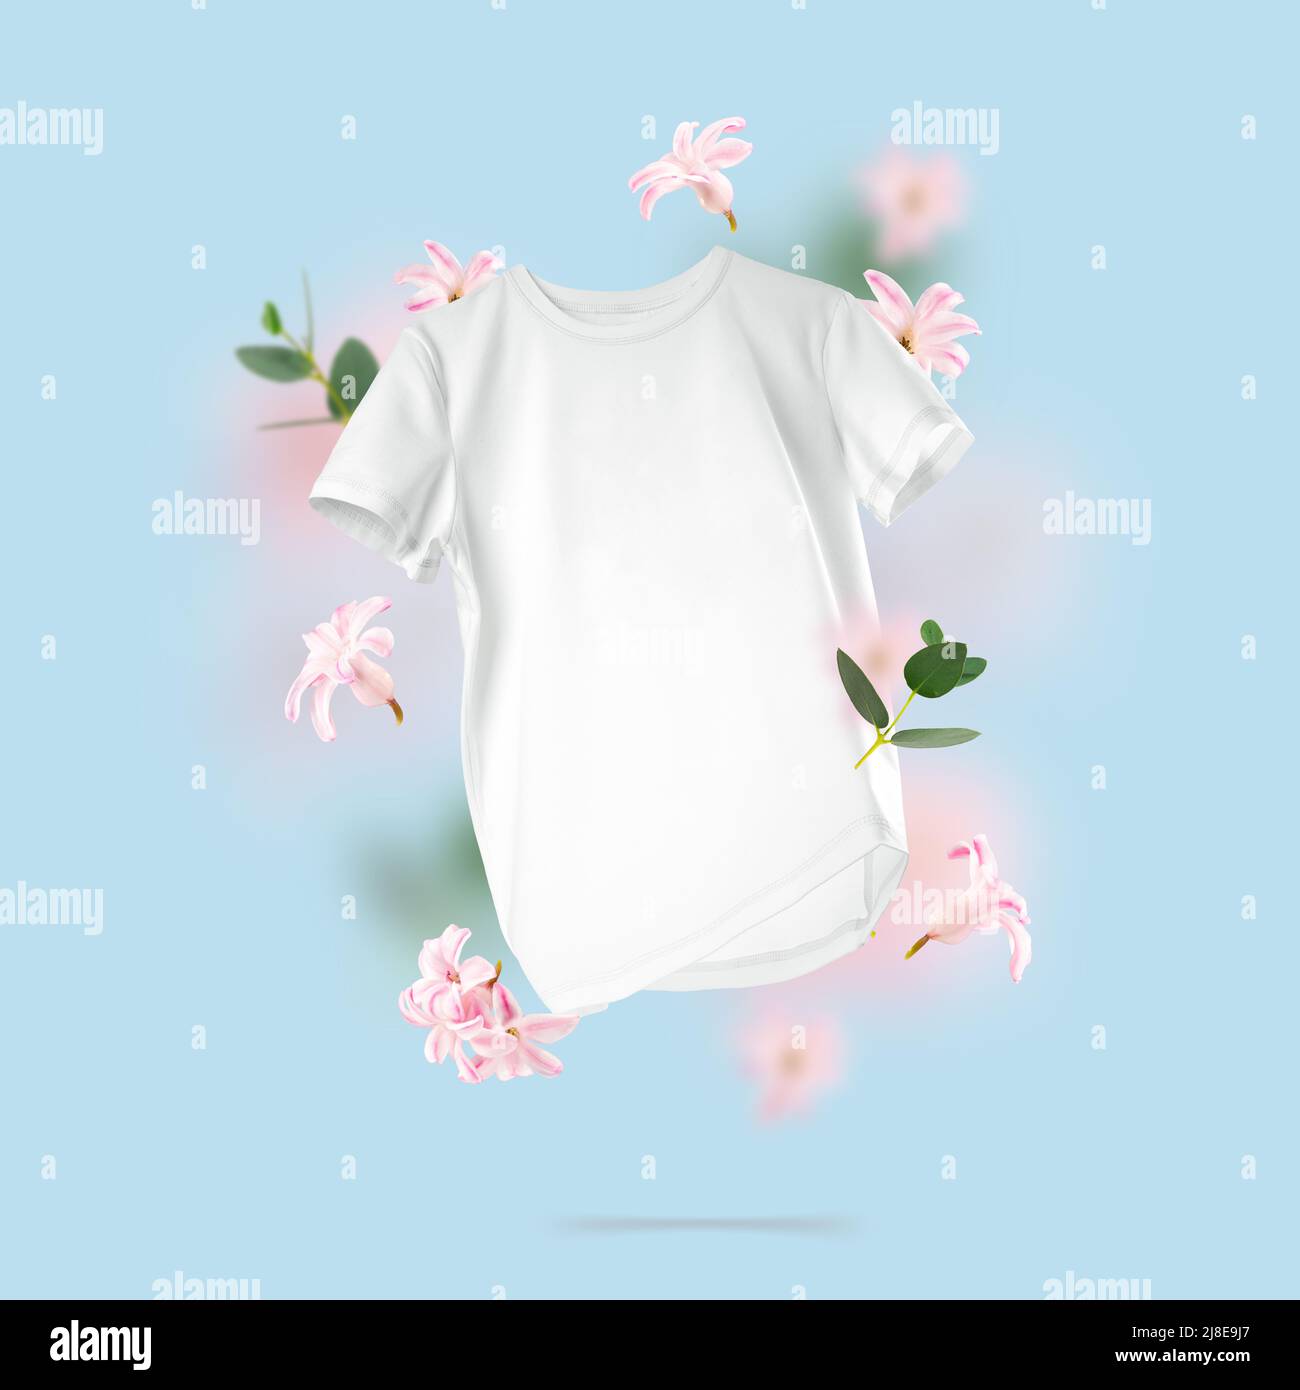 White cotton T-shirt floating on blue background. Conceptual composition of a blank unisex t-shirt and flowers in the air. Branding clothes front view Stock Photo